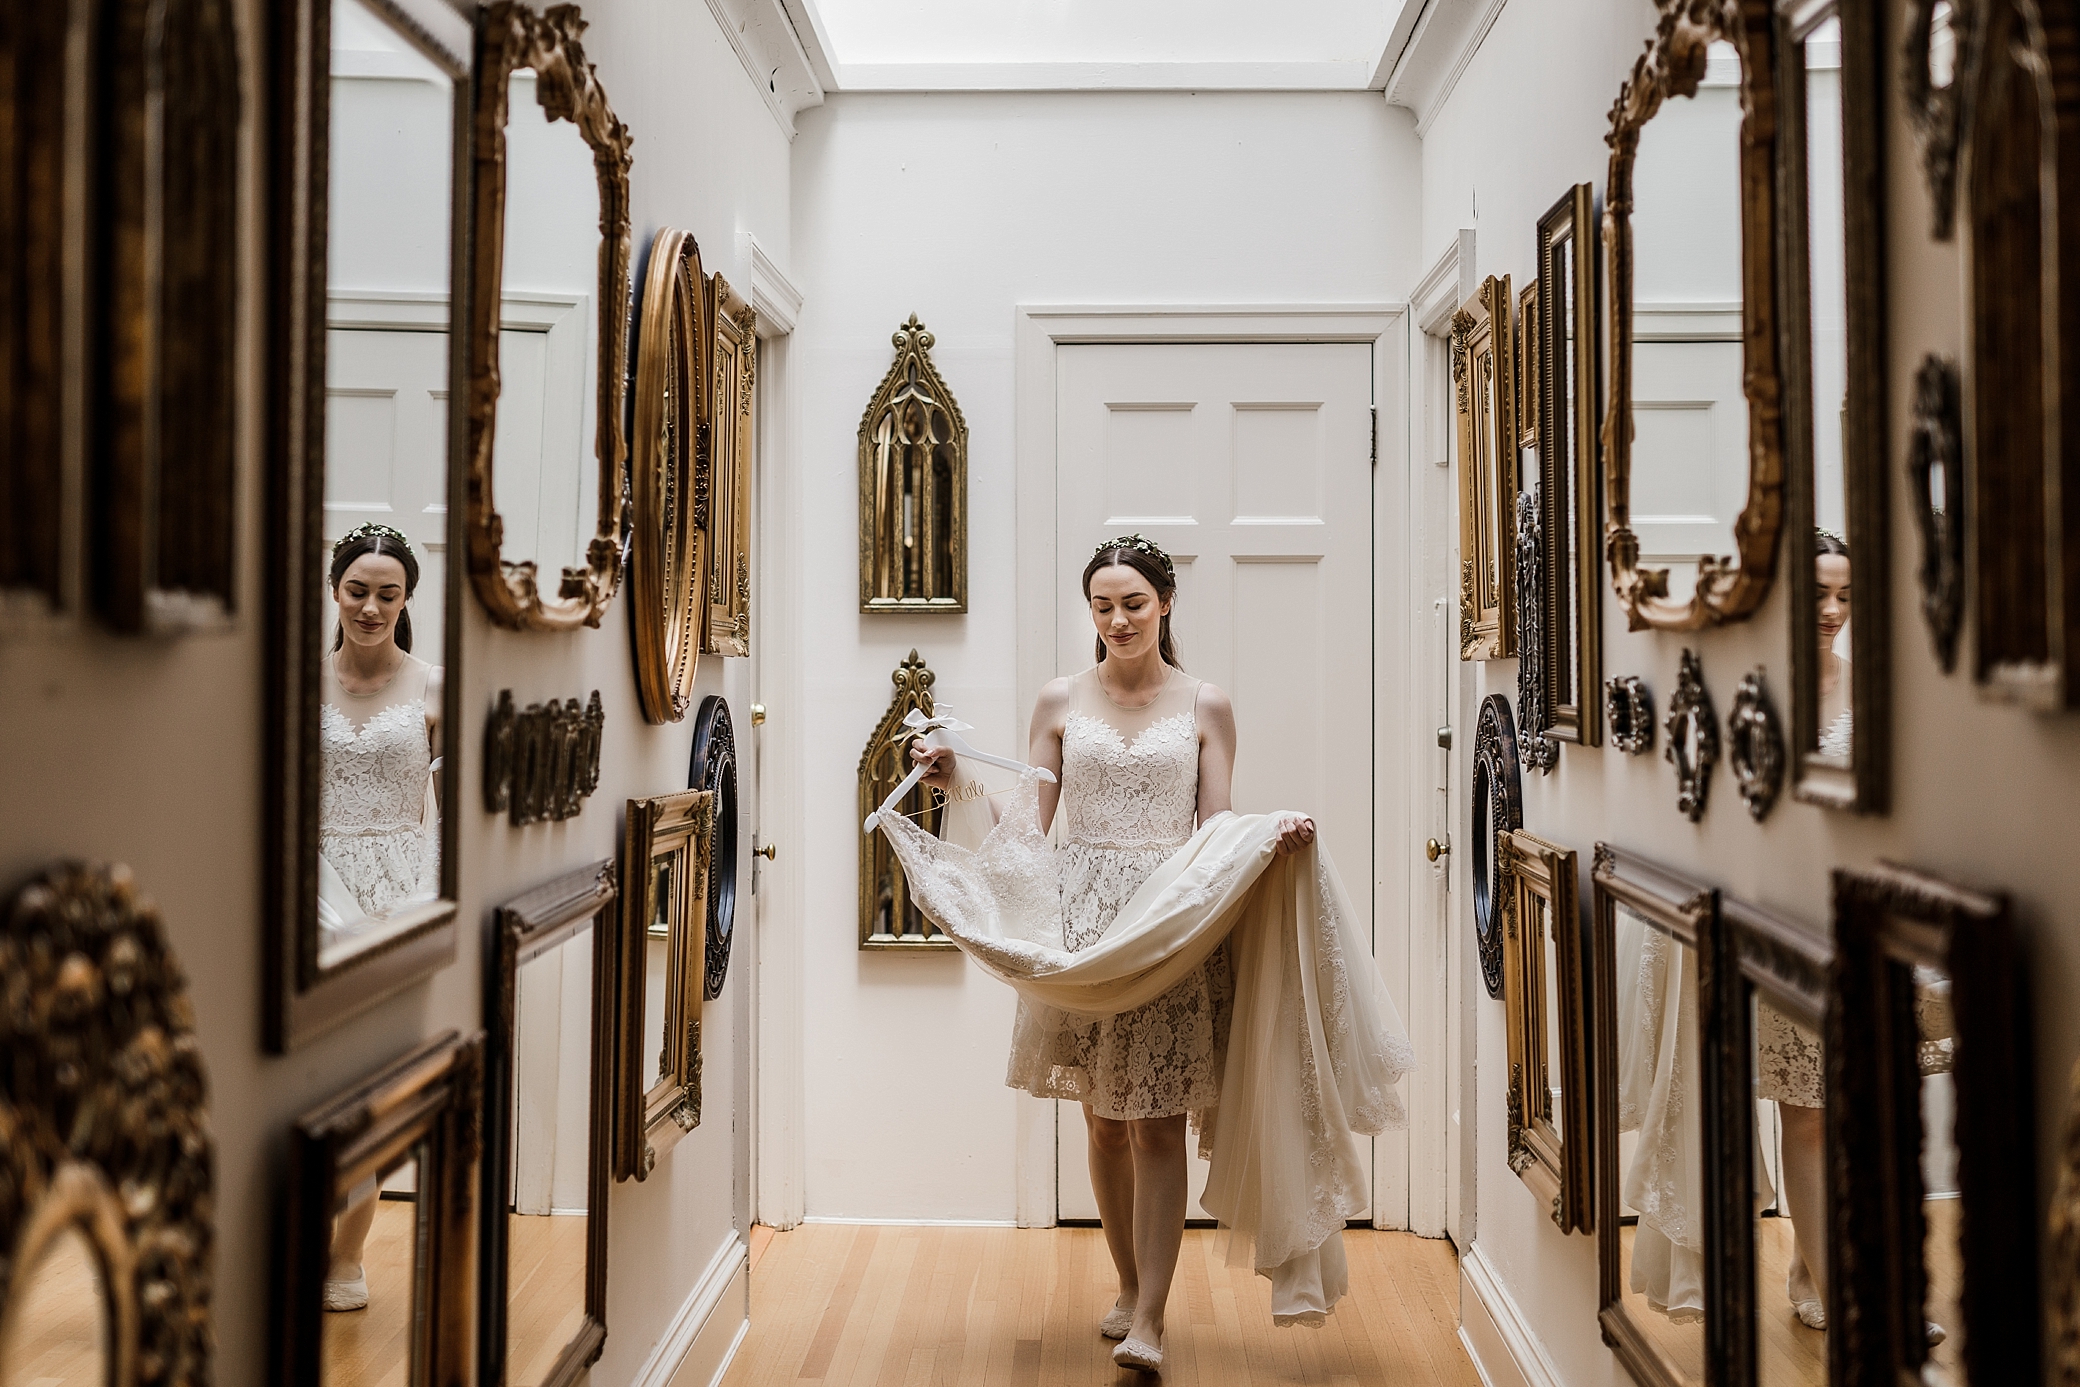 Bride preparing her wedding gown at the Thornewood Castle | Megan Montalvo Photography